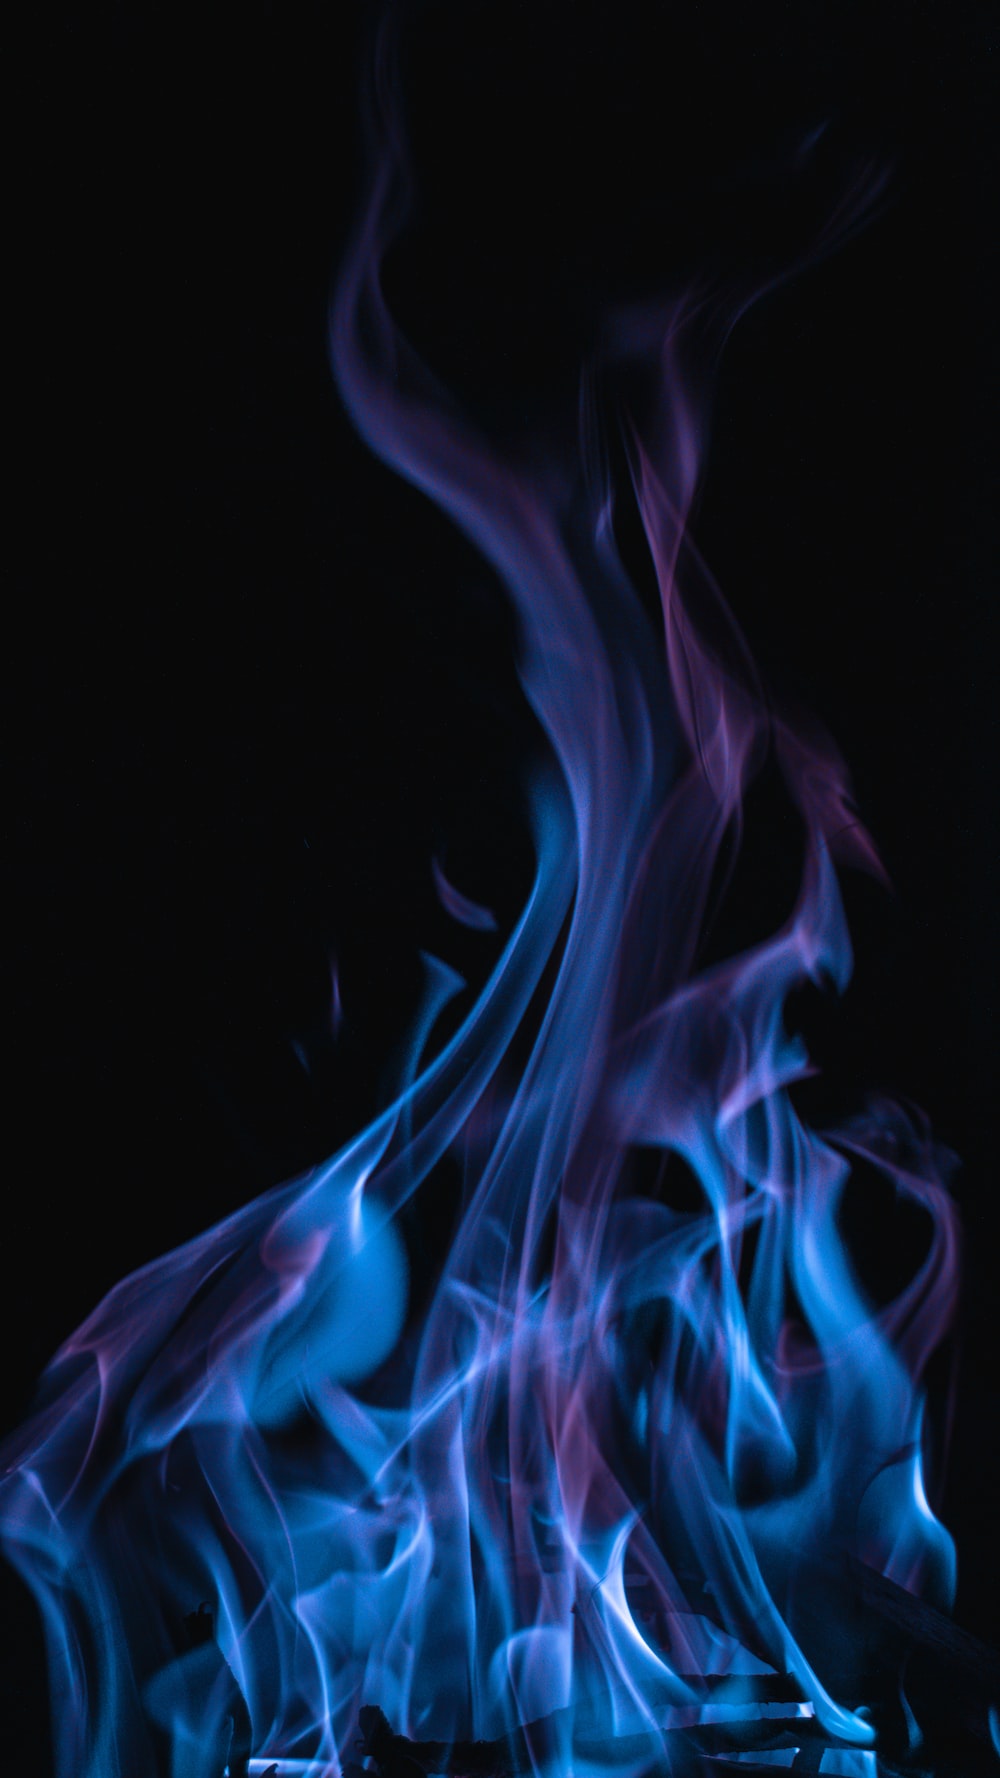 Blue Fire Picture. Download Free Image